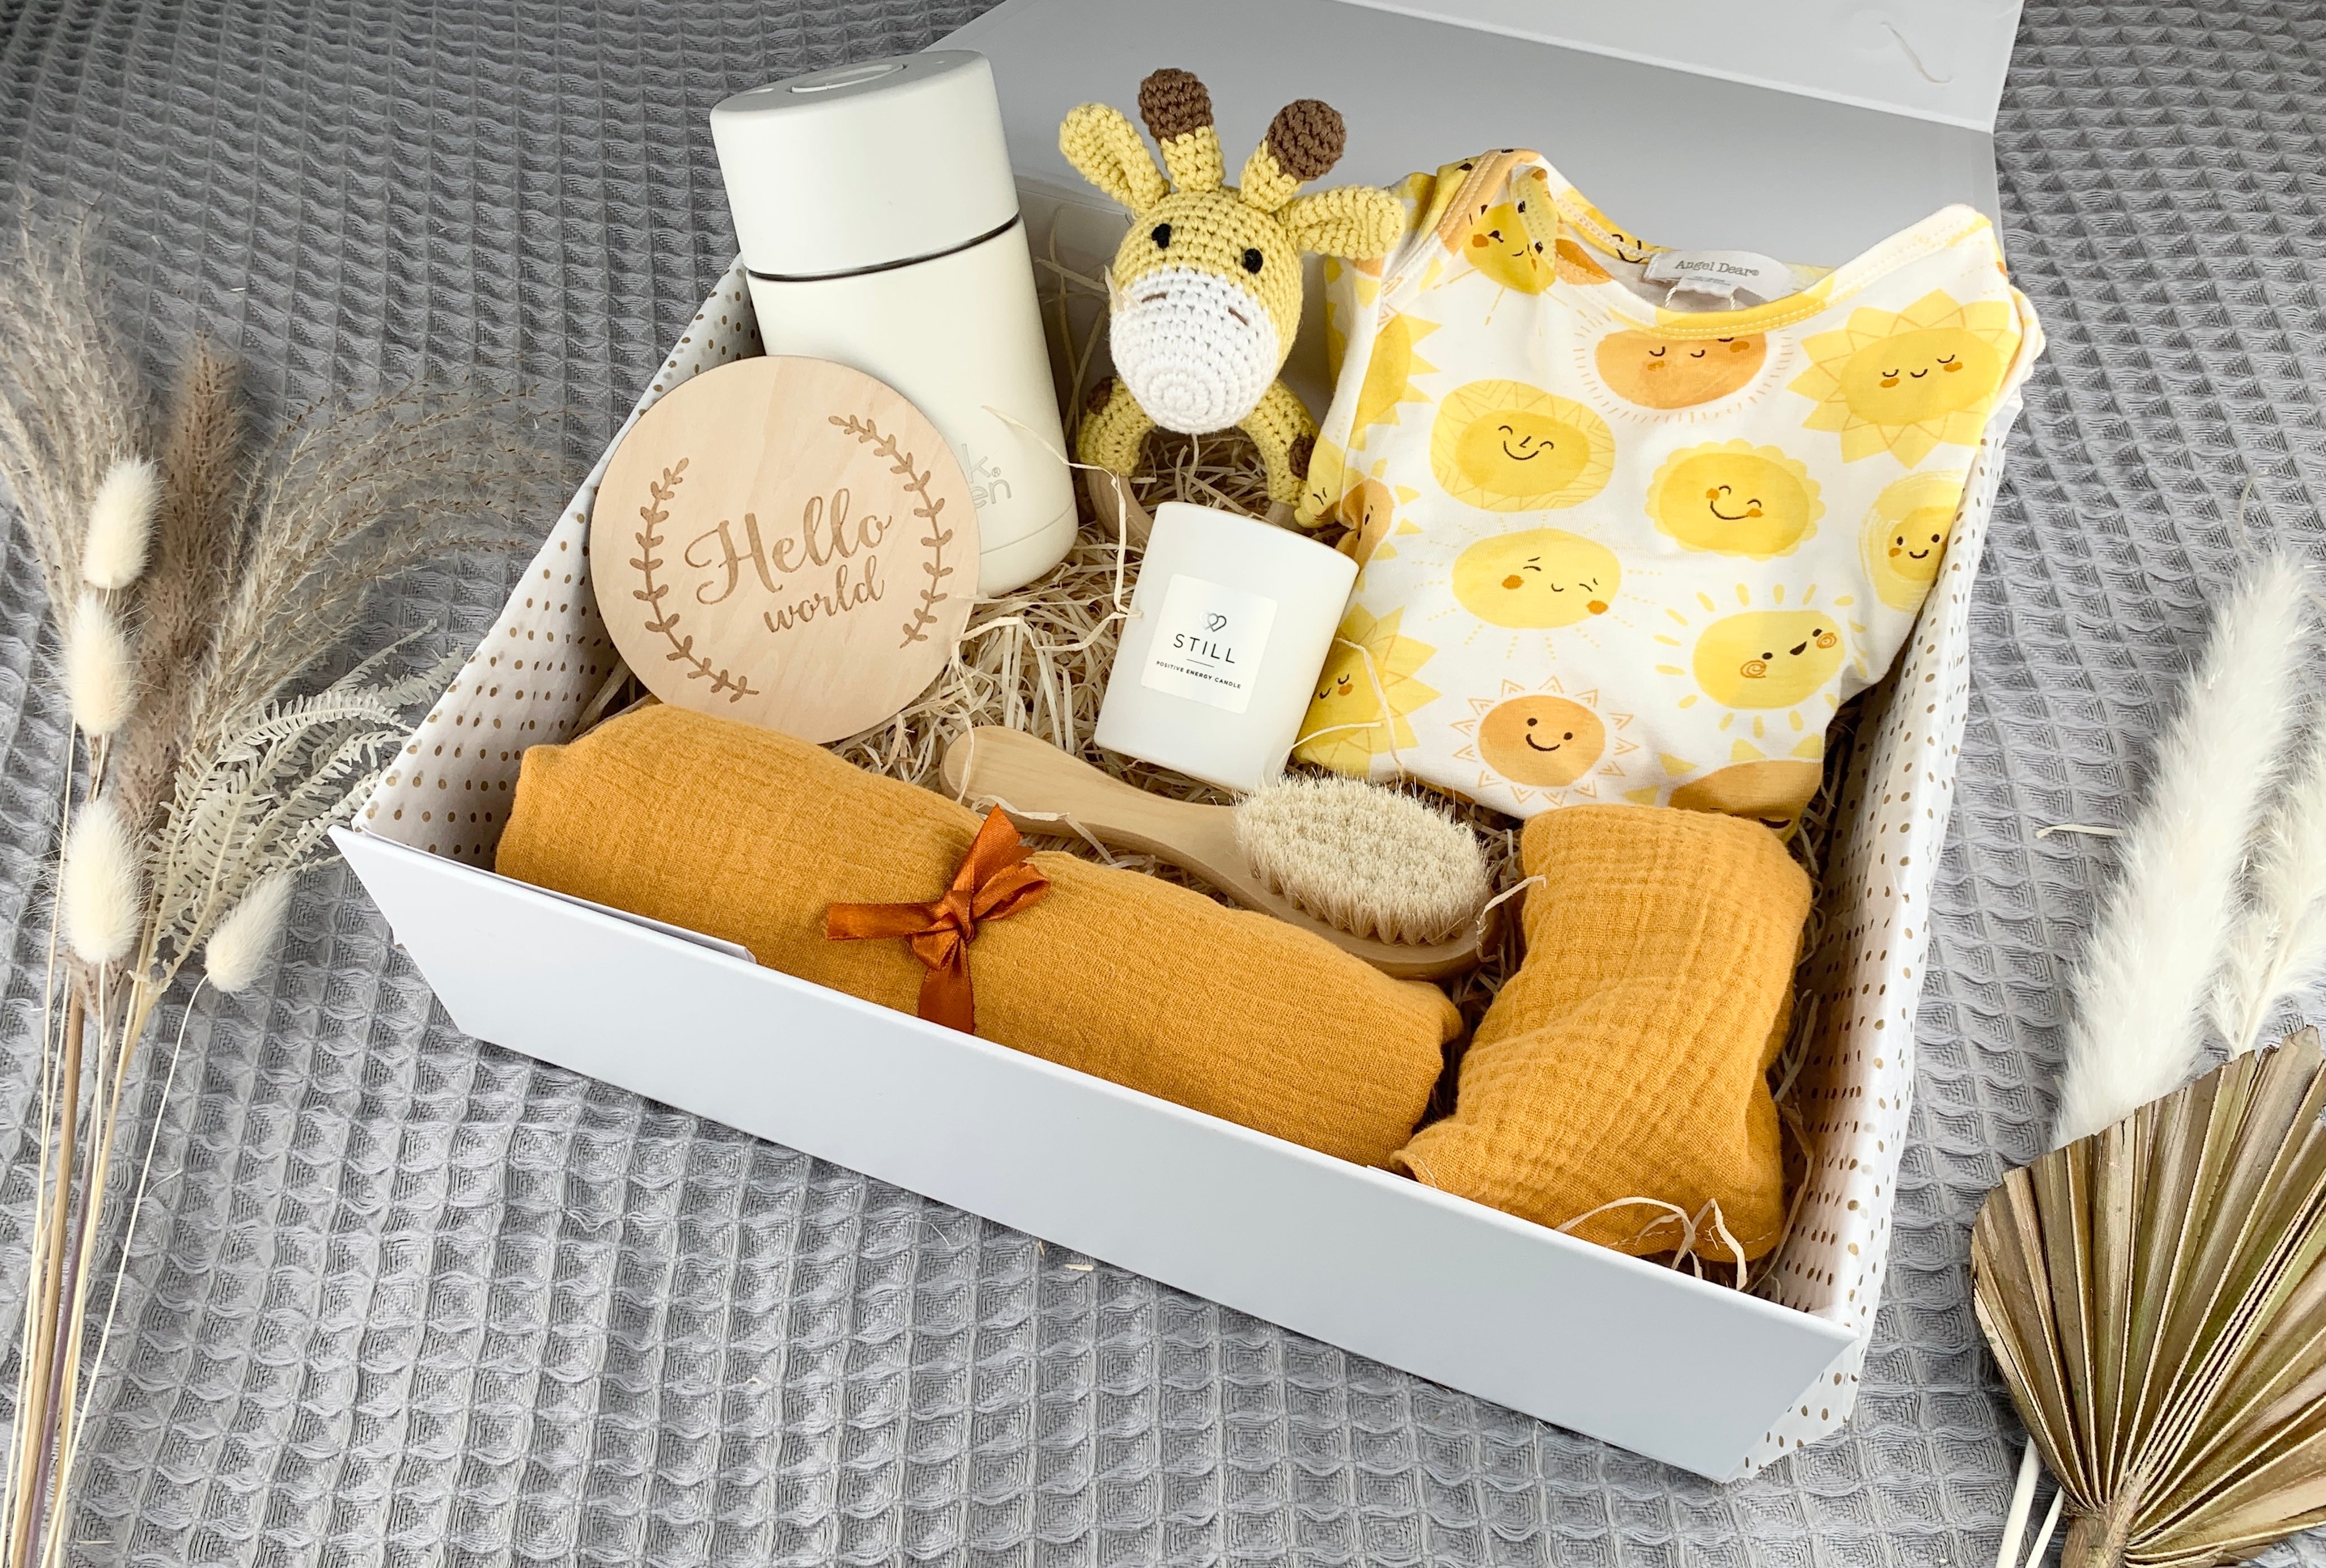 Large sunshine baby gift box containing yellow crochet giraffe rattle, Angel Dear sunshine baby grow, wooden brush, 100% cotton mustard bib and muslin, Still candle, Frank Green ceramic coffee cup and Hello world wooden announcement disc